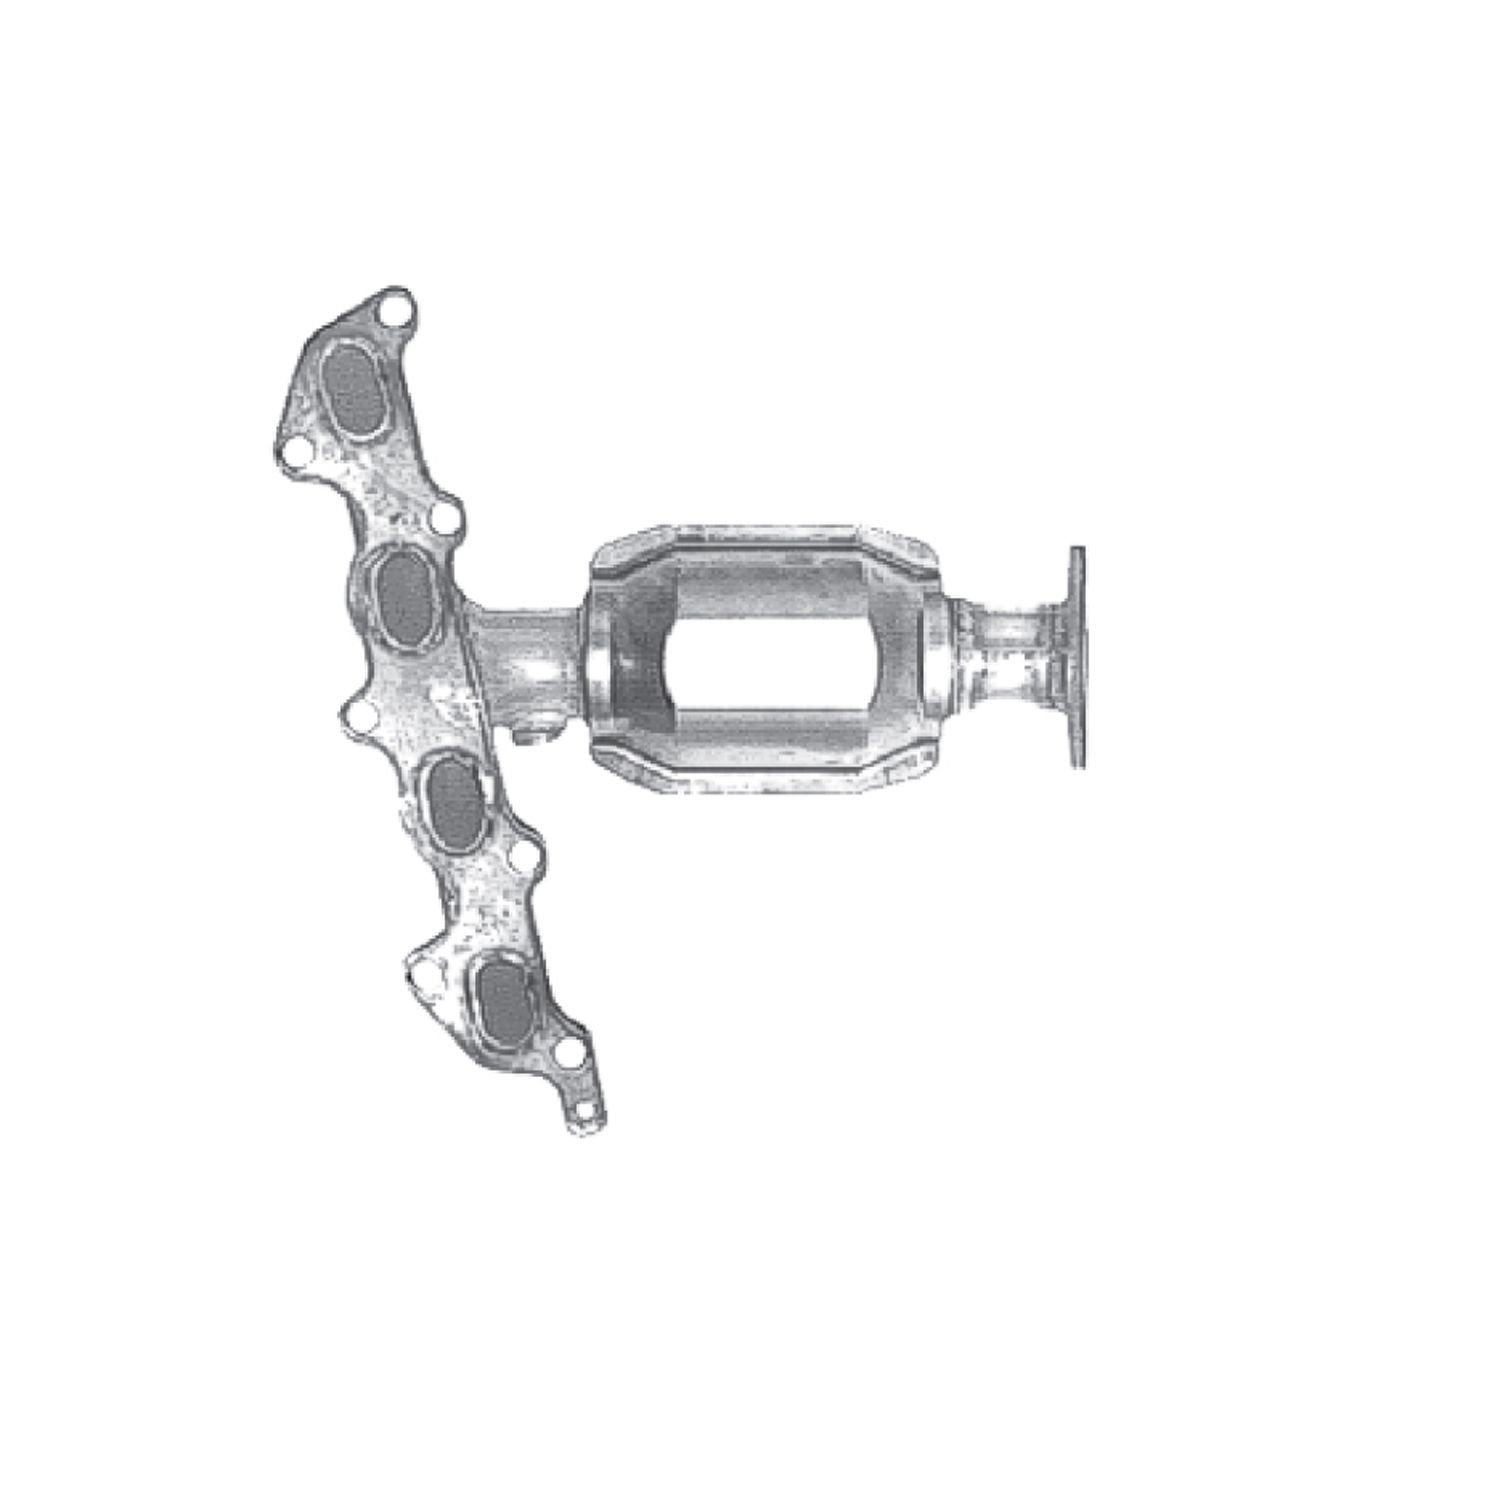 AP EXHAUST W/O FEDERAL CONVERTER - Catalytic Converter with Integrated Exhaust Manifold - APK 641194